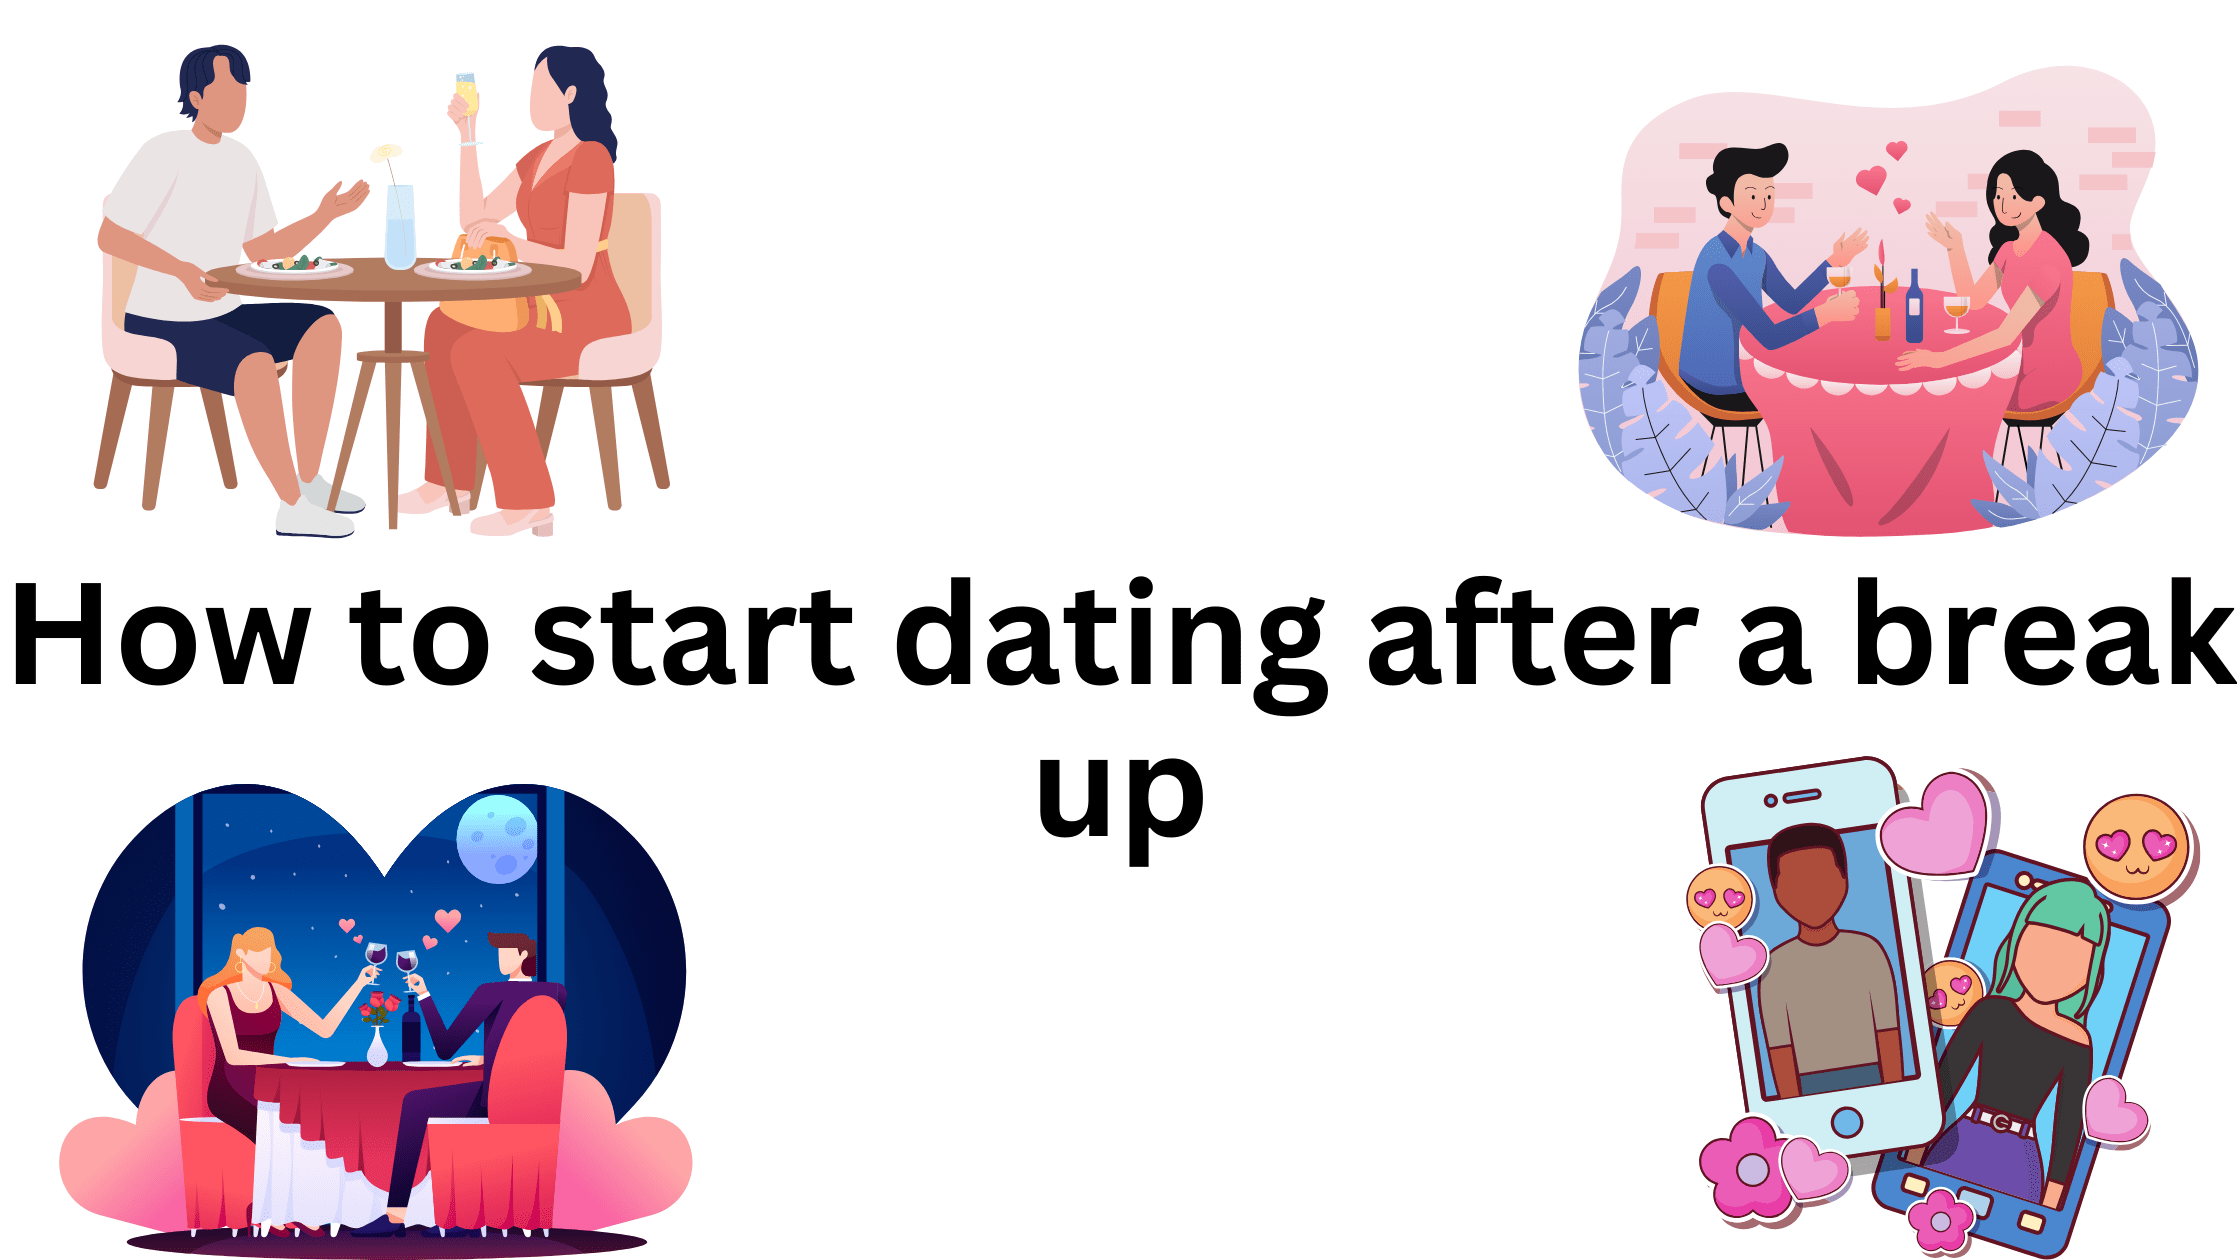 10 Great Ways to Start Dating After a Break Up 38